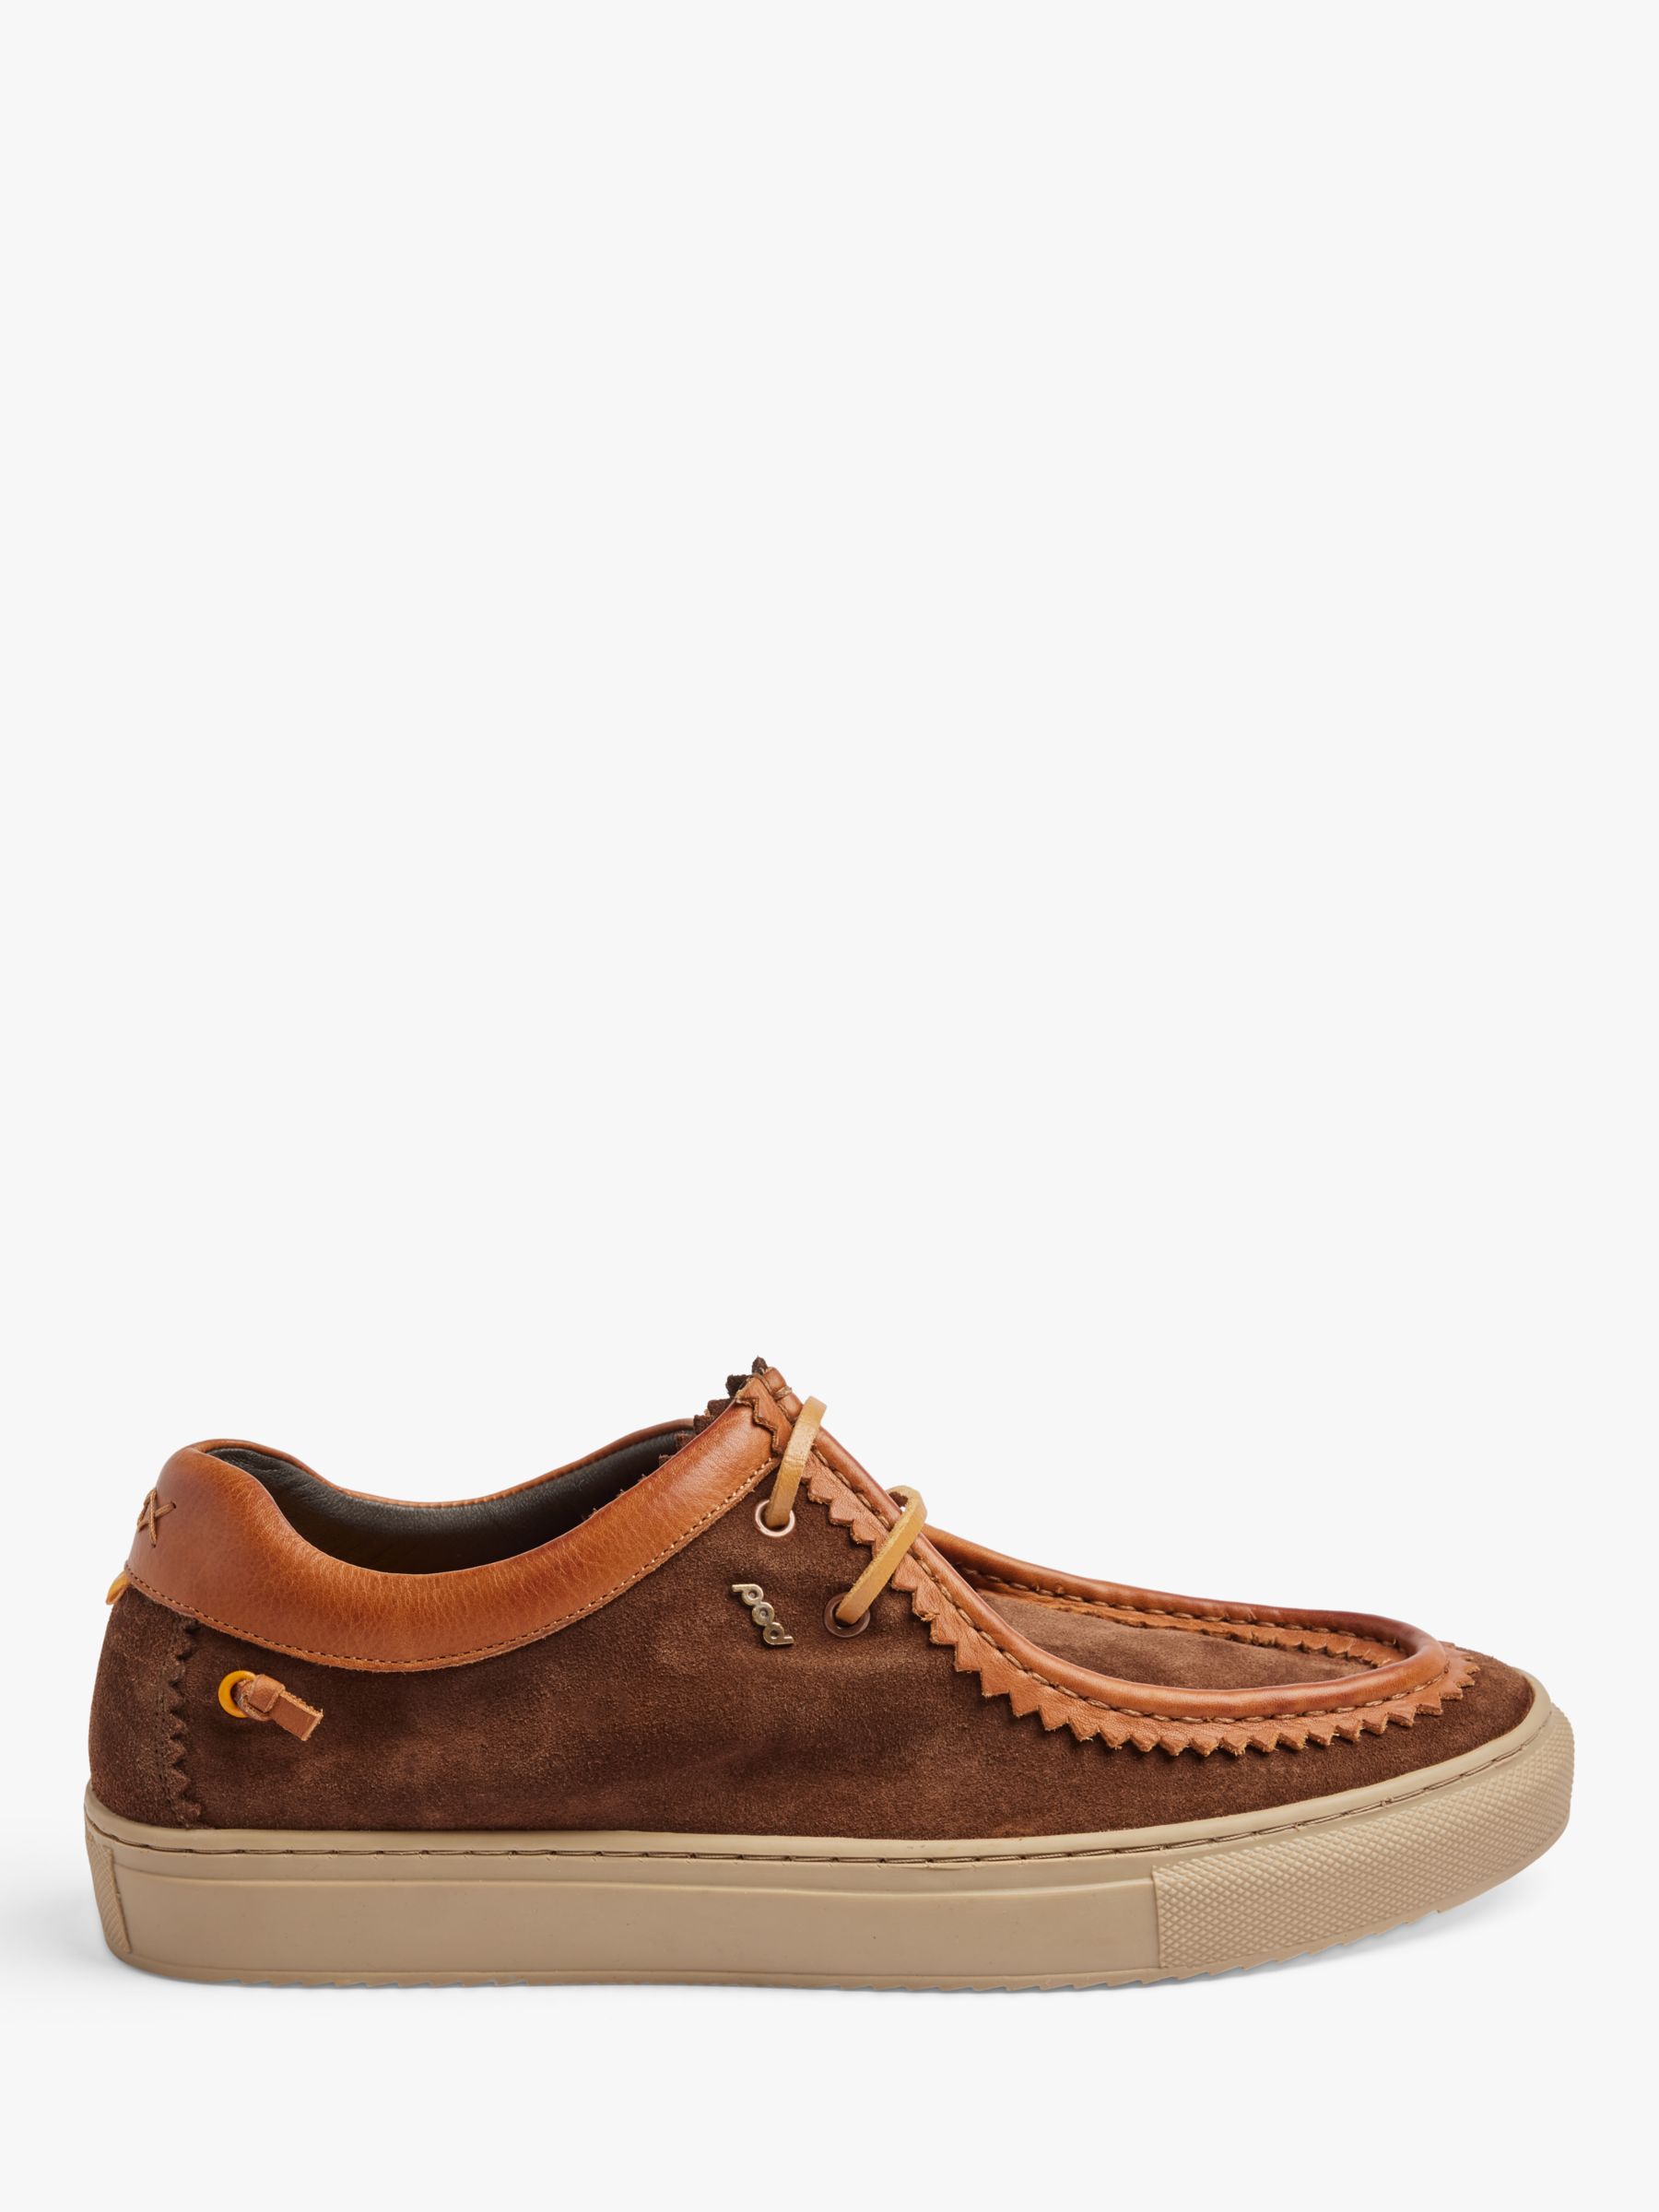 Pod Winston Suede Lace Up Casual Shoes, Brown at John Lewis & Partners